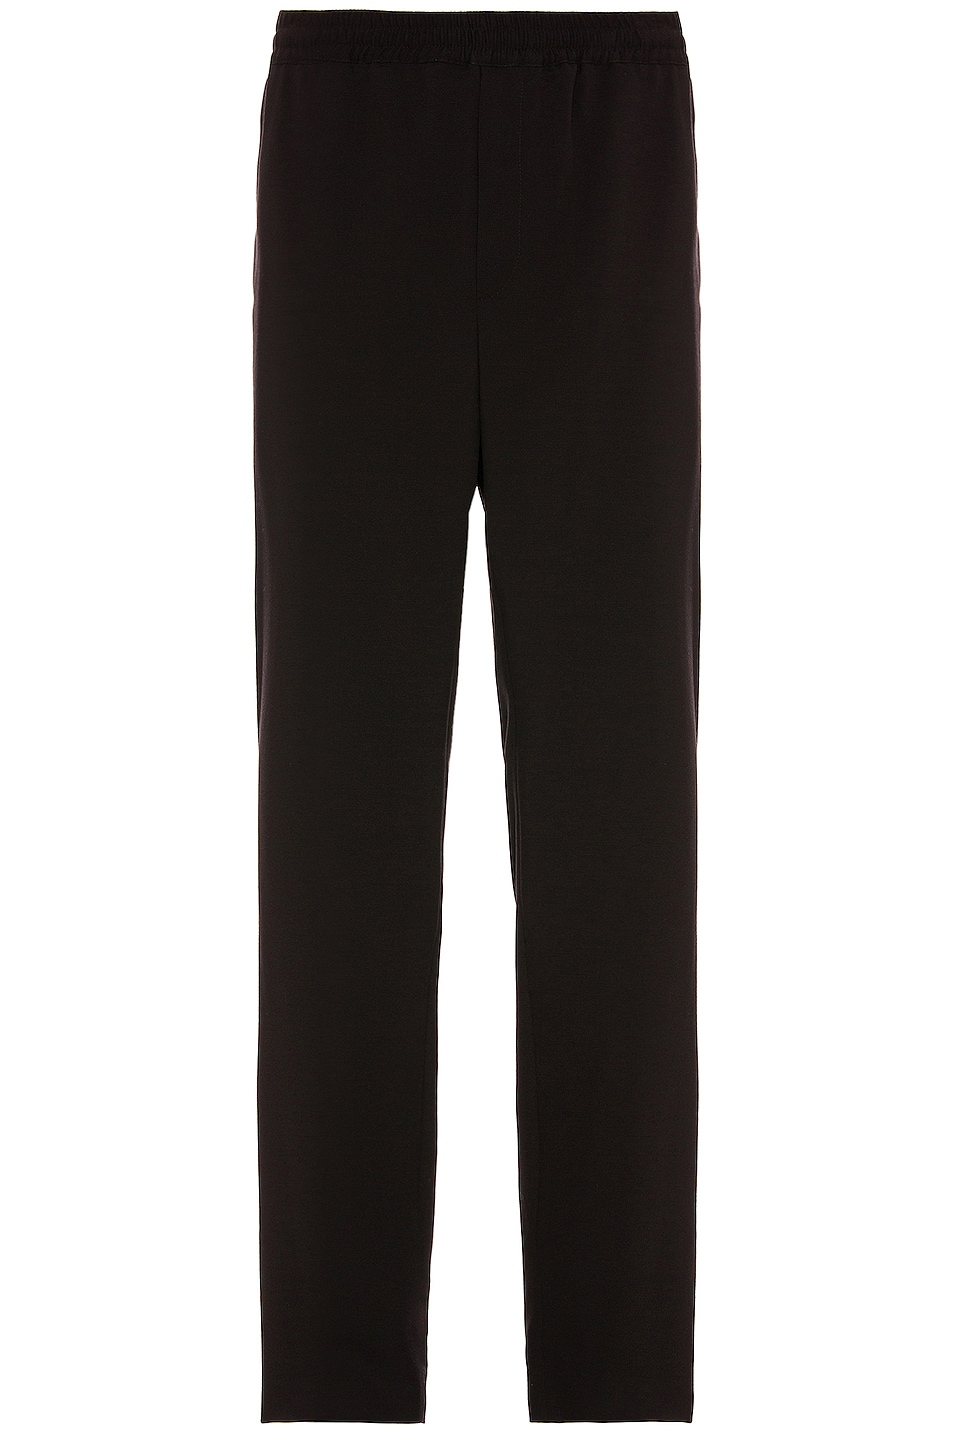 Image 1 of The Row Jonah Pant in Black